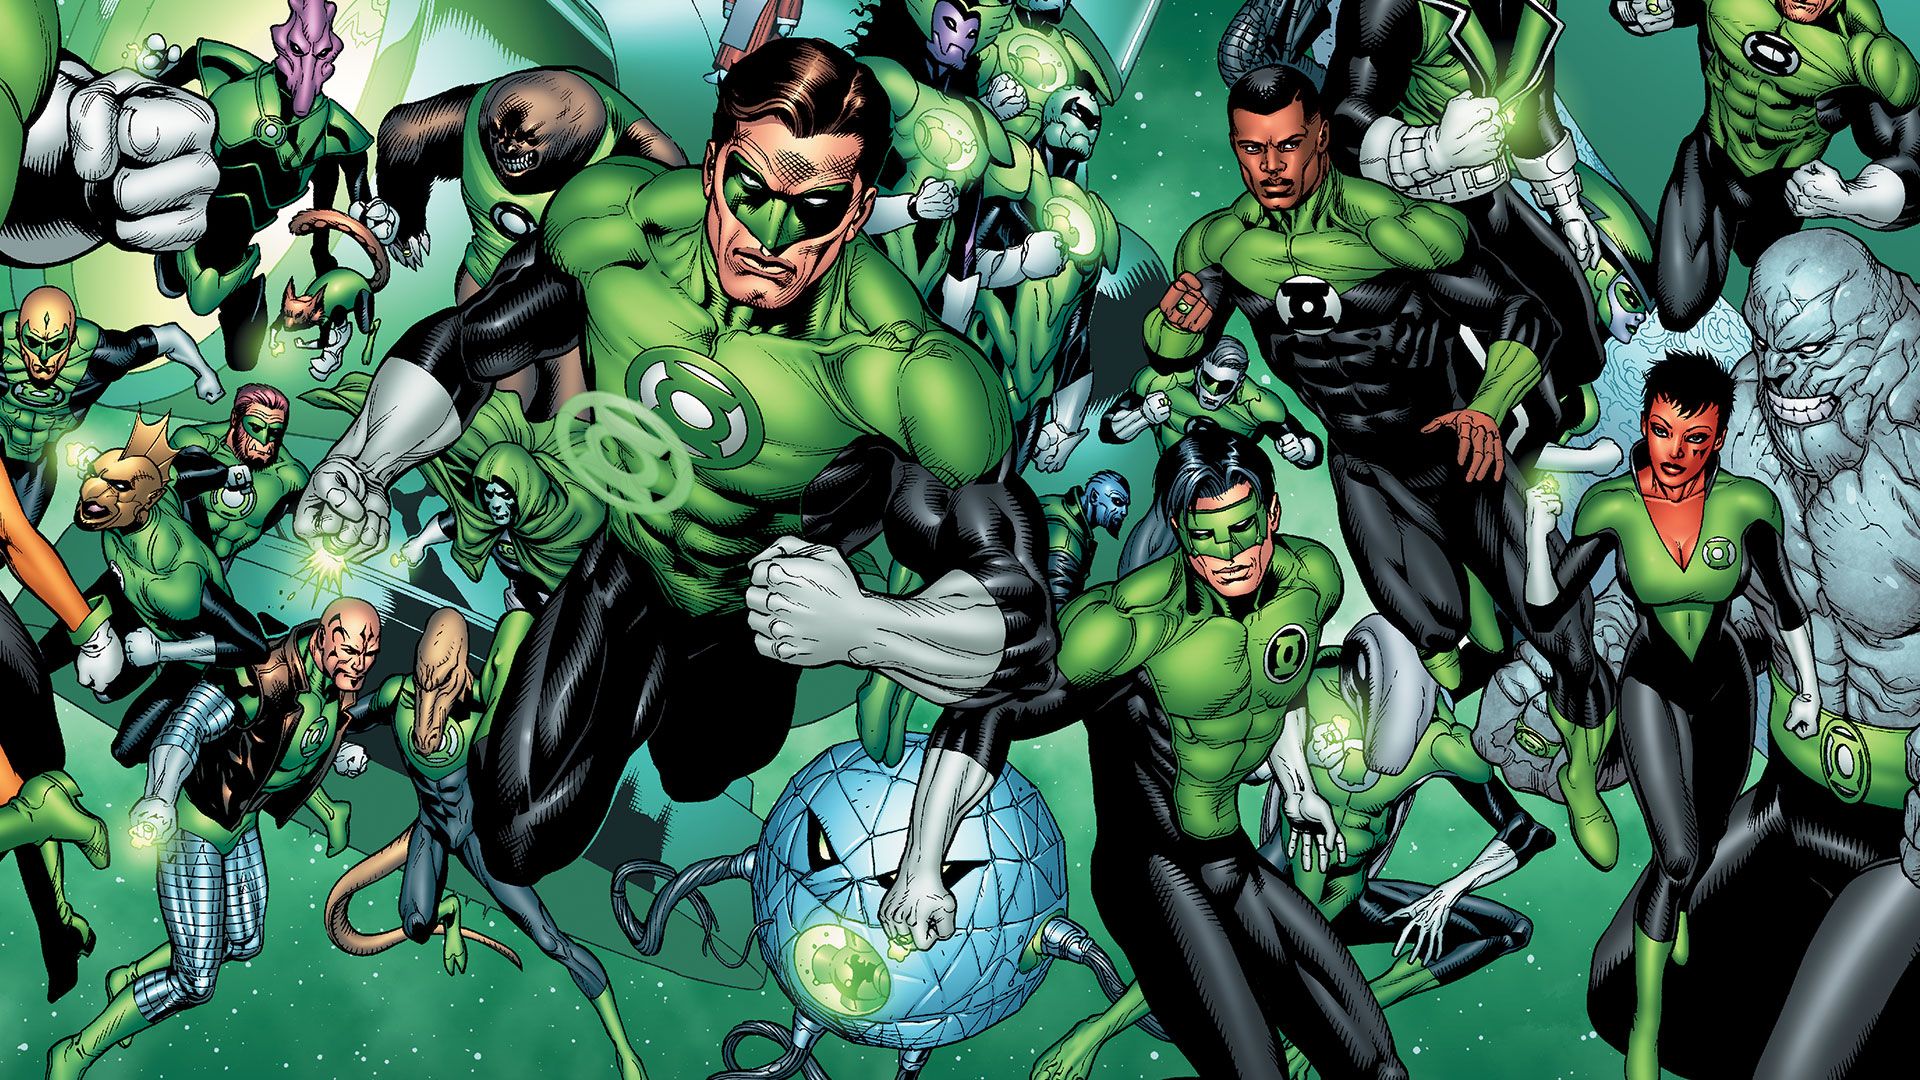 In Brightest Day: Twelve Iconic Moments in the Green Lantern Saga